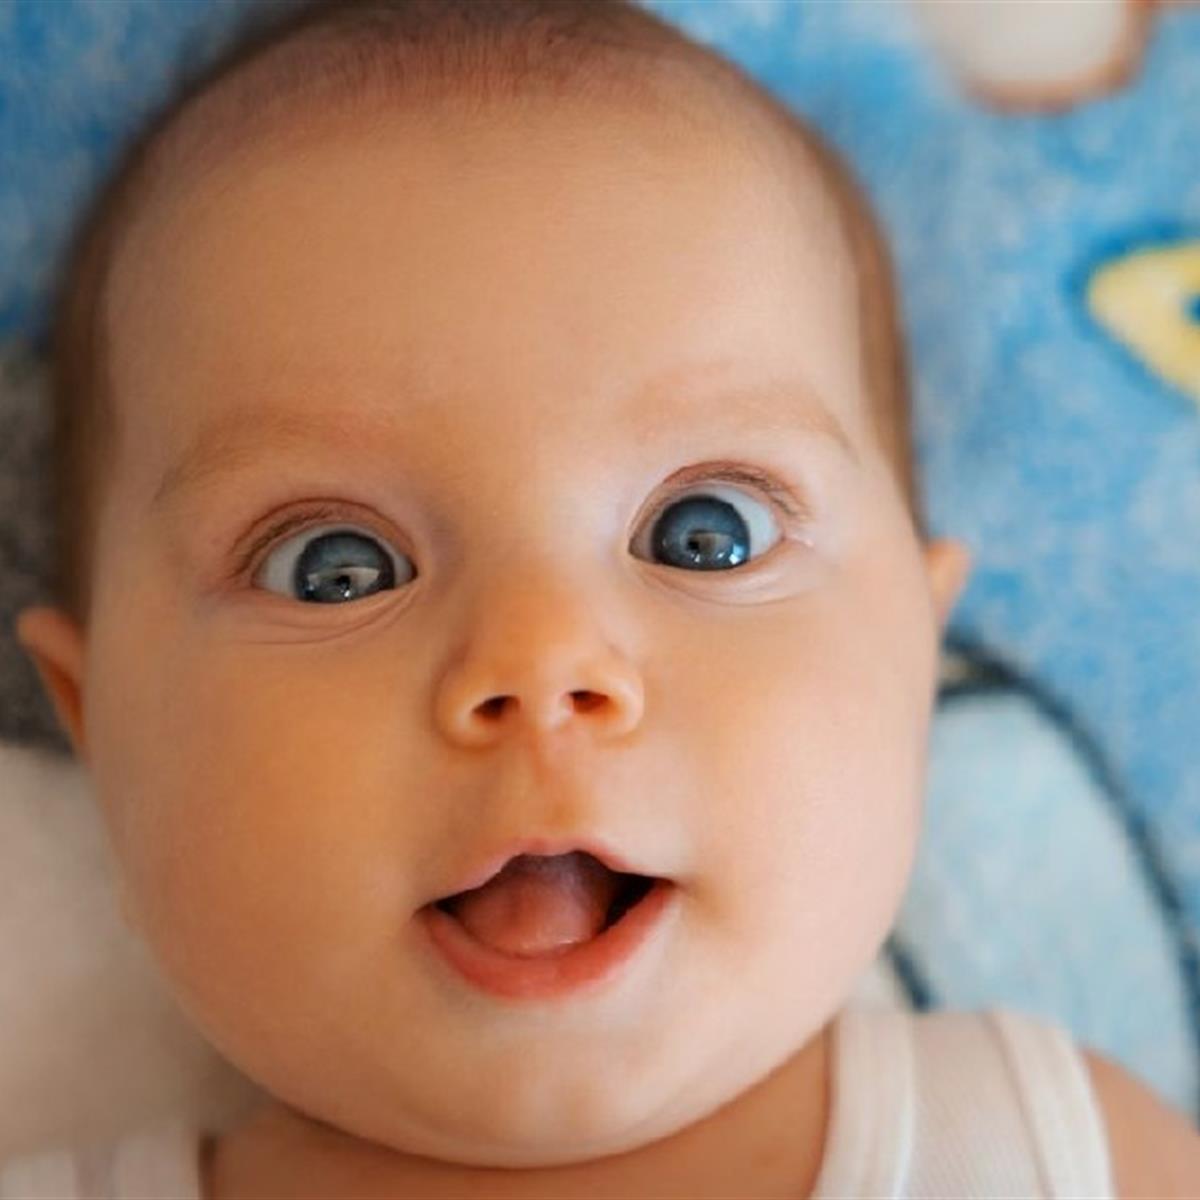 What Color Will My Baby's Eyes Be? - HealthyChildren.org